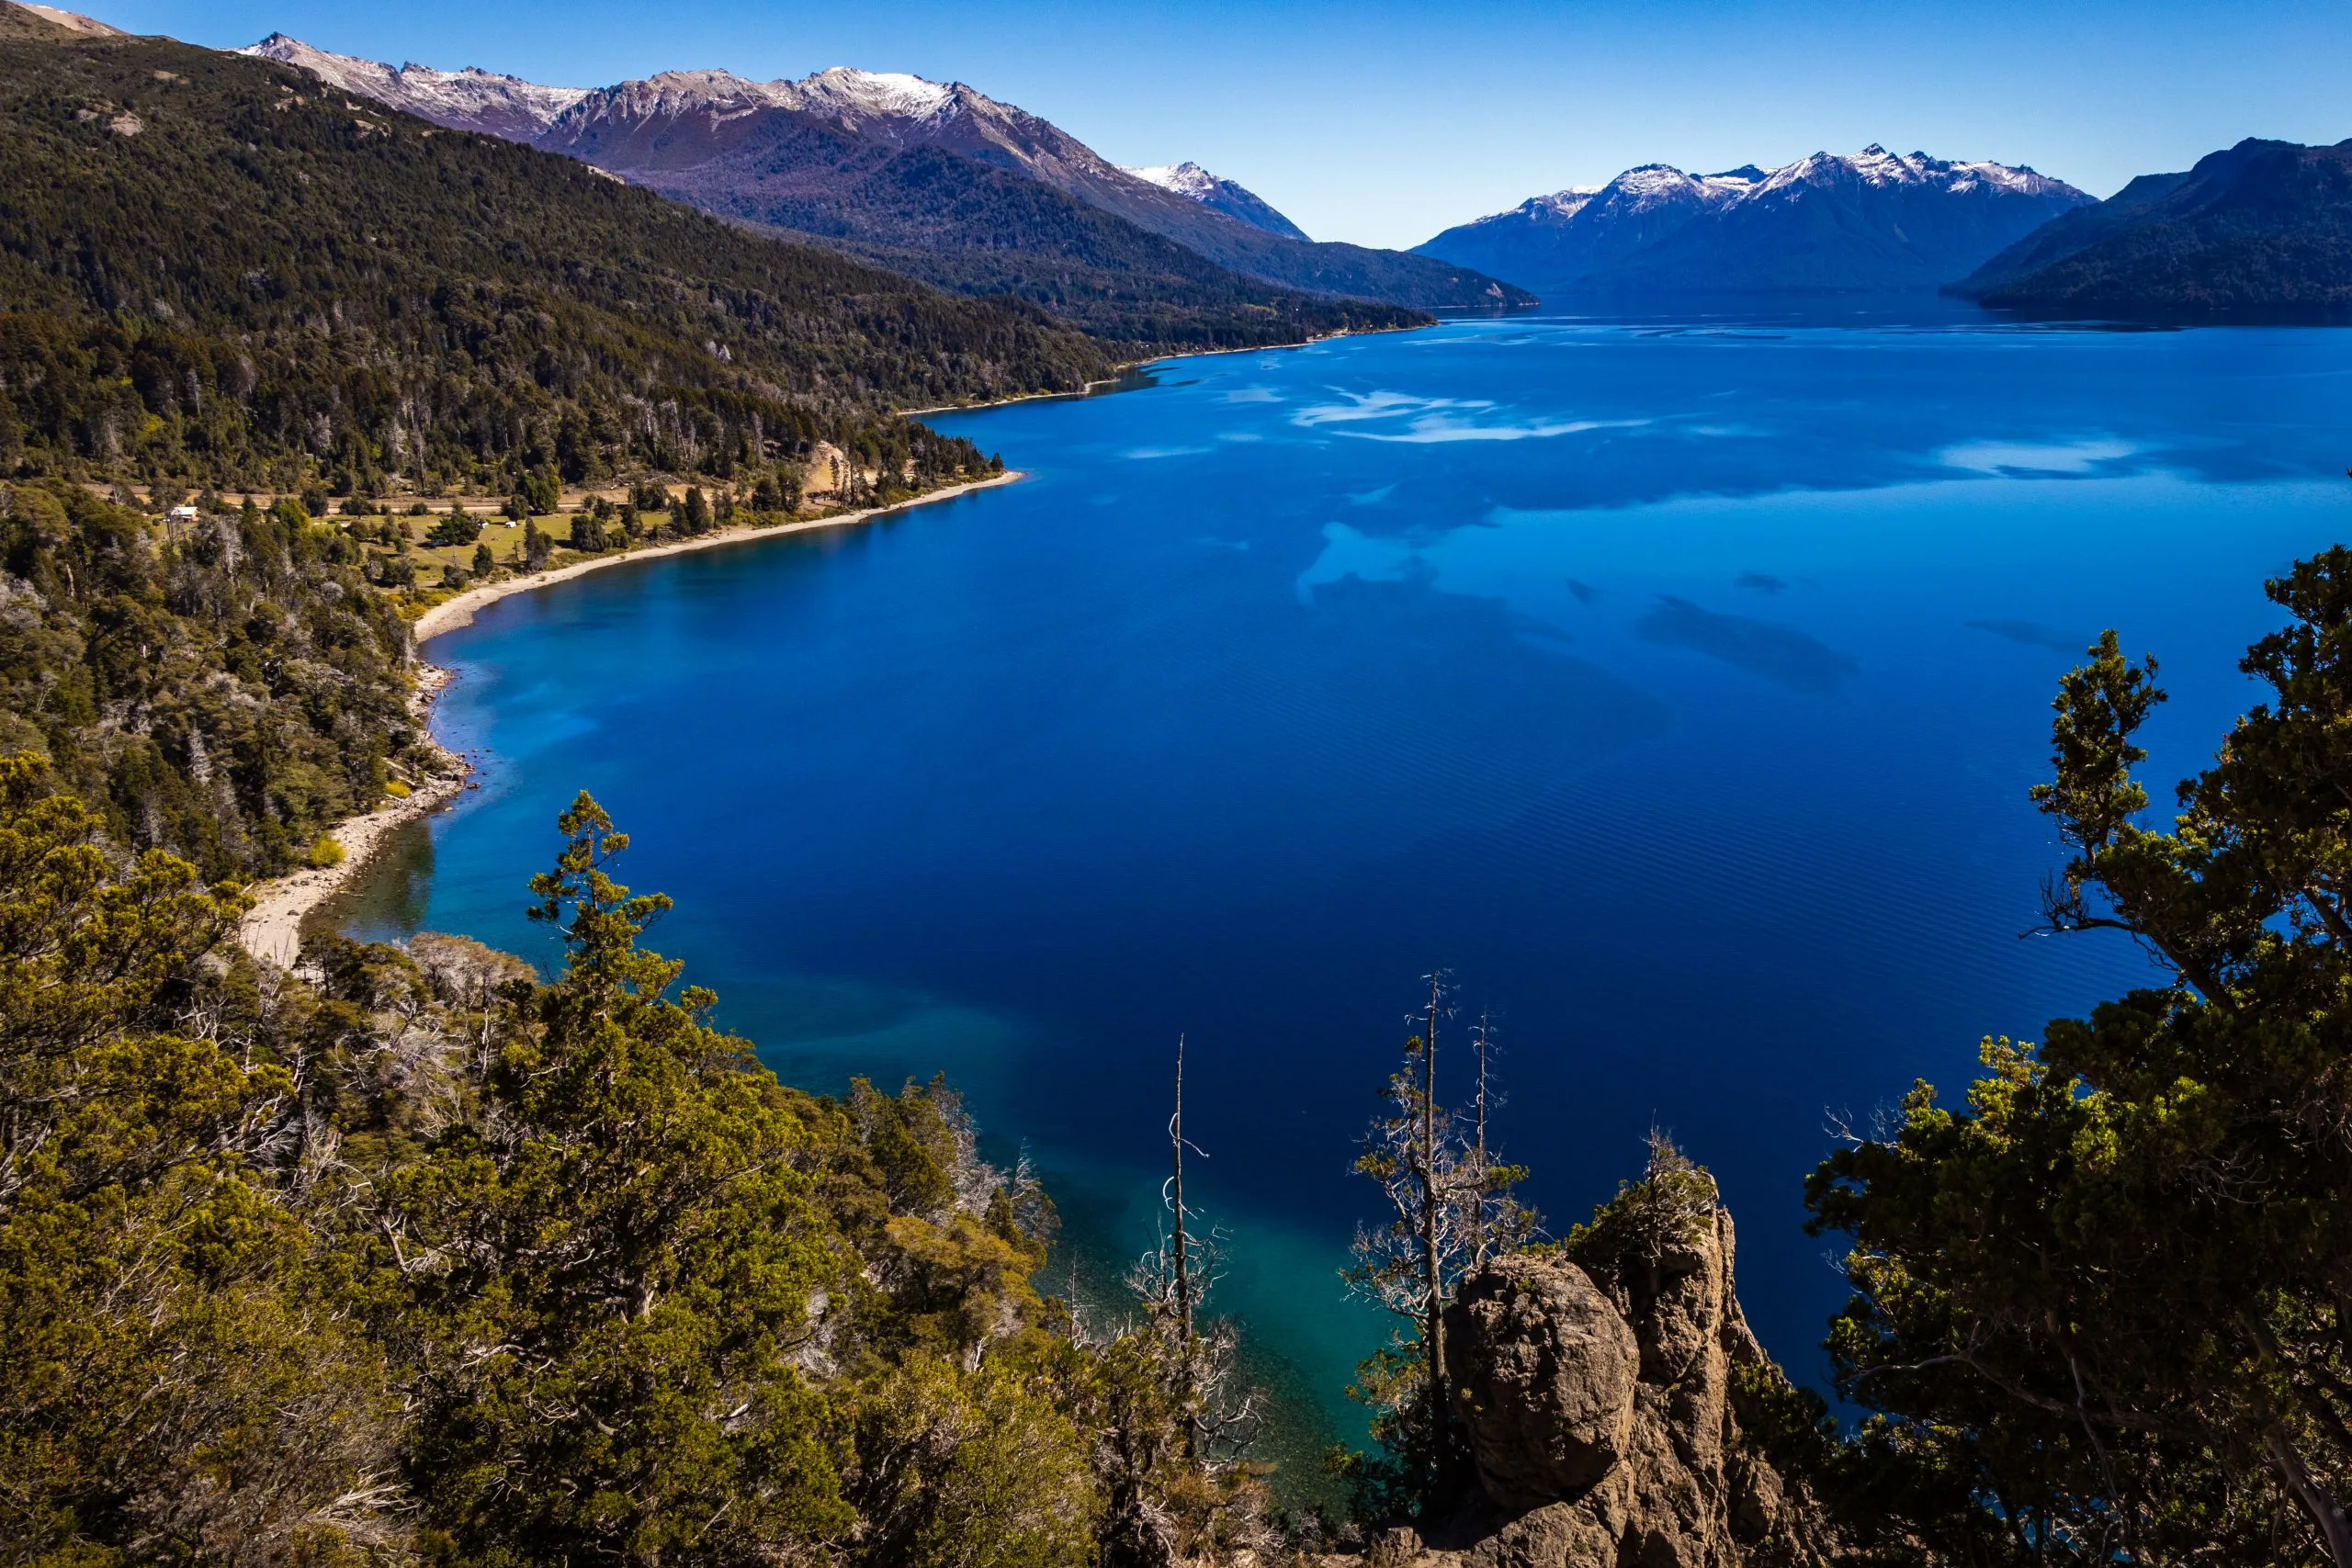 Villa Traful, Patagonia, Argentina. Beautiful Traful Lake off of the Limay River in Neuquen Province which is located inside of the Nahuel Huapi National Park.